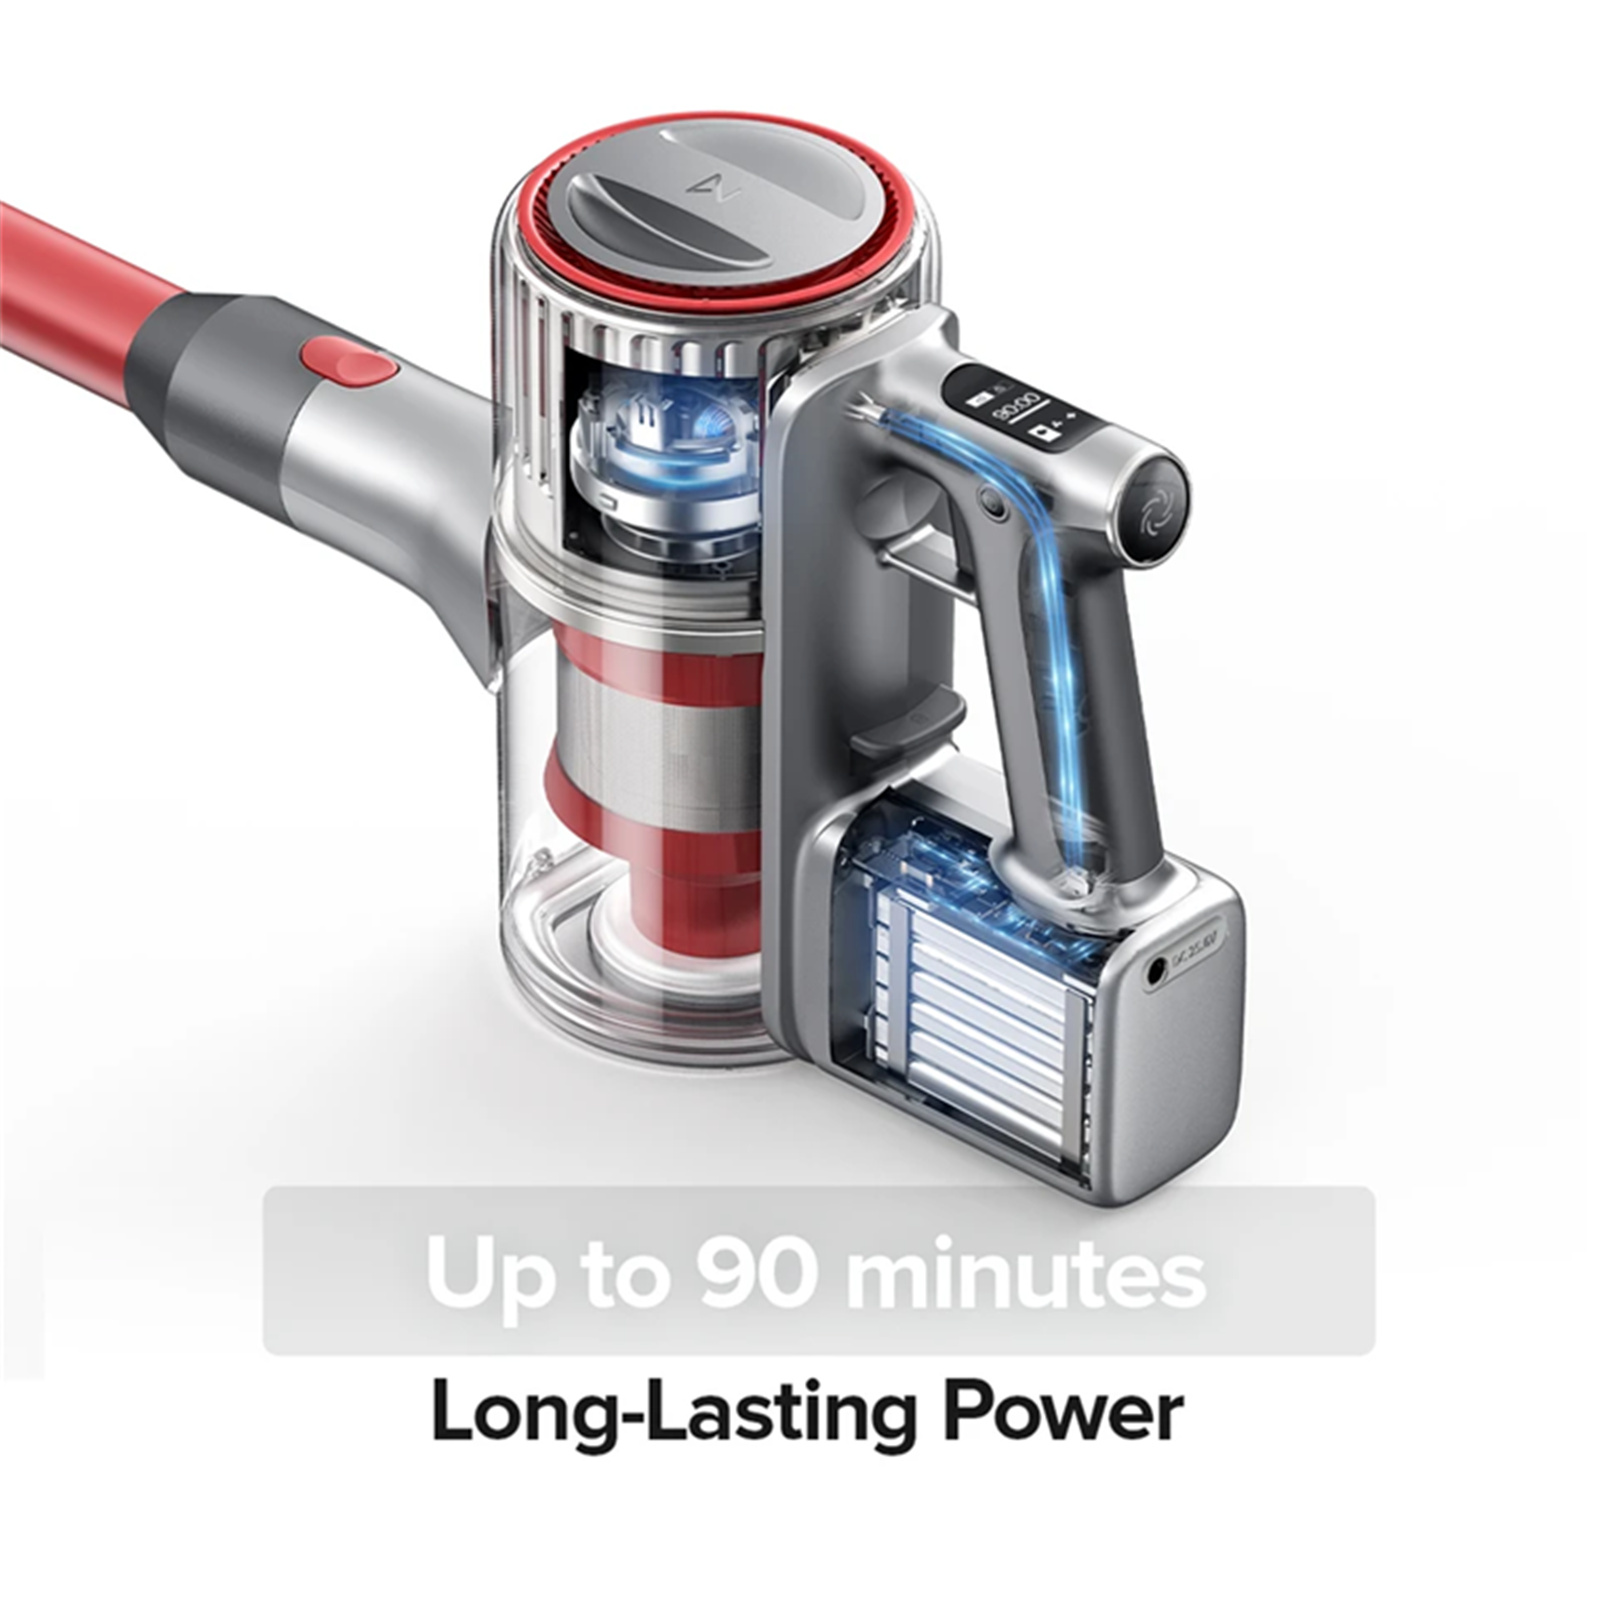 Buy the Roborock H7 Handheld Cordless Stick Vacuum Cleaner 160AW Power  Suction... ( H7M1A ) online - PBTech.com/pacific